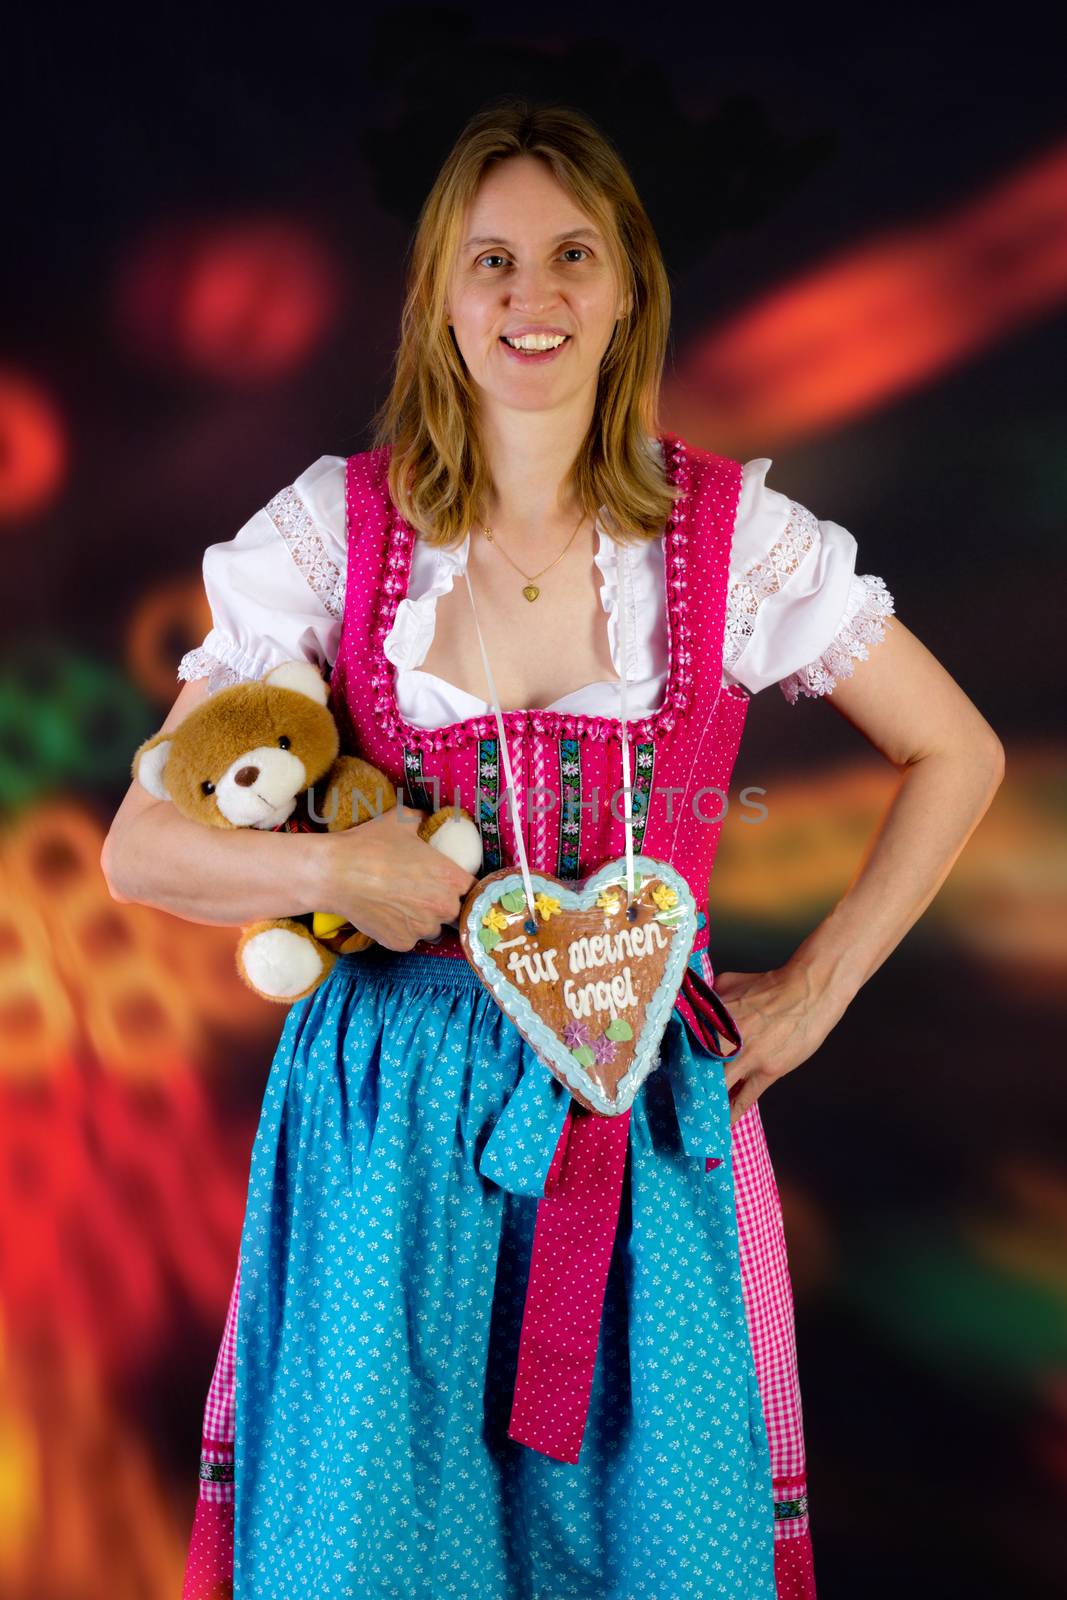 Woman with teddy and gingerbread at fun fair by gwolters